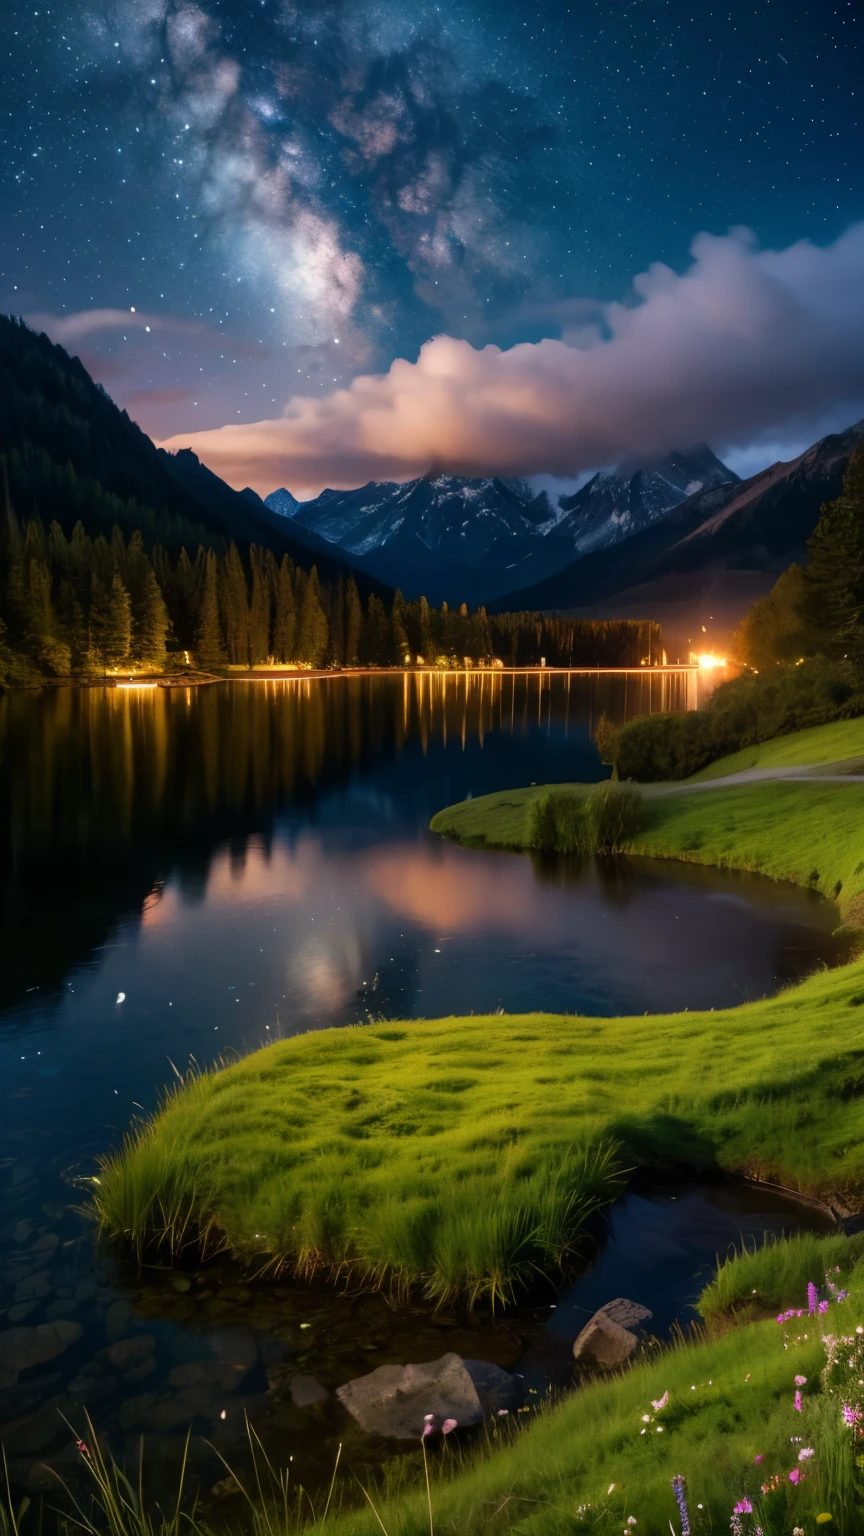 Logo, Amazing, 8K, Tabletop, Raw Photo, Amazing, Top Quality, High Quality, High Definition, Real, Ultra HD, Night, Wind, Story Poetry, Beauty of Mountains and Forests, Grasslands of the World, Silence and Beauty, Vast land, lakeside, amazing scenery, beautiful natural scenery